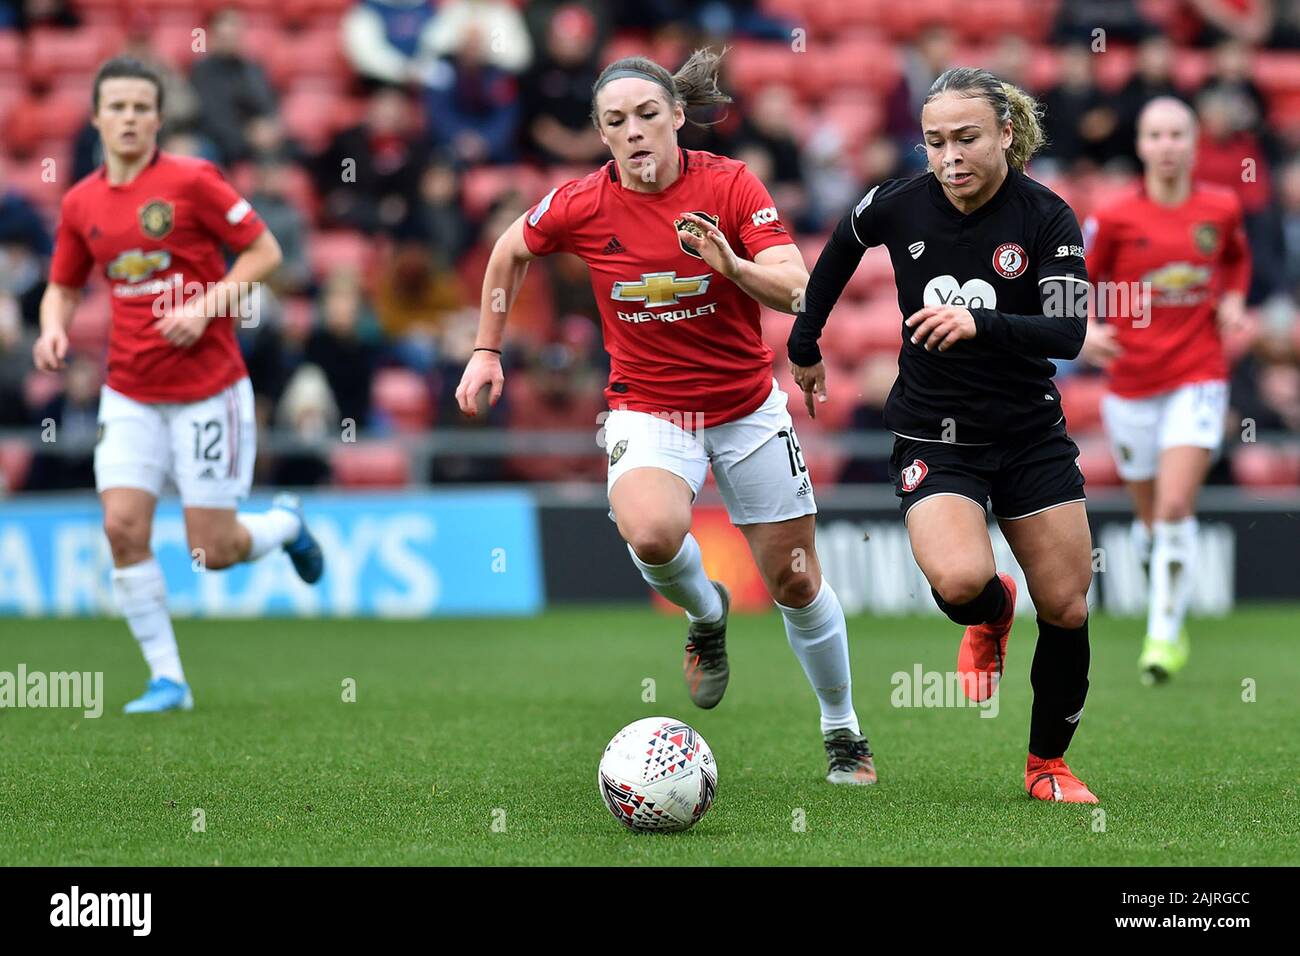 Leigh, UK. 05th Jan, 2020. LEIGH, ENGLAND - JANUARY 5THKirsty Hanson of Manchester United Women and Ebony Salmon of Bristol City Women during the Barclays FA Women's Super League match between Manchester United and Bristol City at Leigh Sport Stadium, Leigh on Sunday 5th January 2020. (Credit: Eddie Garvey | MI News) Photograph may only be used for newspaper and/or magazine editorial purposes, license required for commercial use Credit: MI News & Sport /Alamy Live News Stock Photo